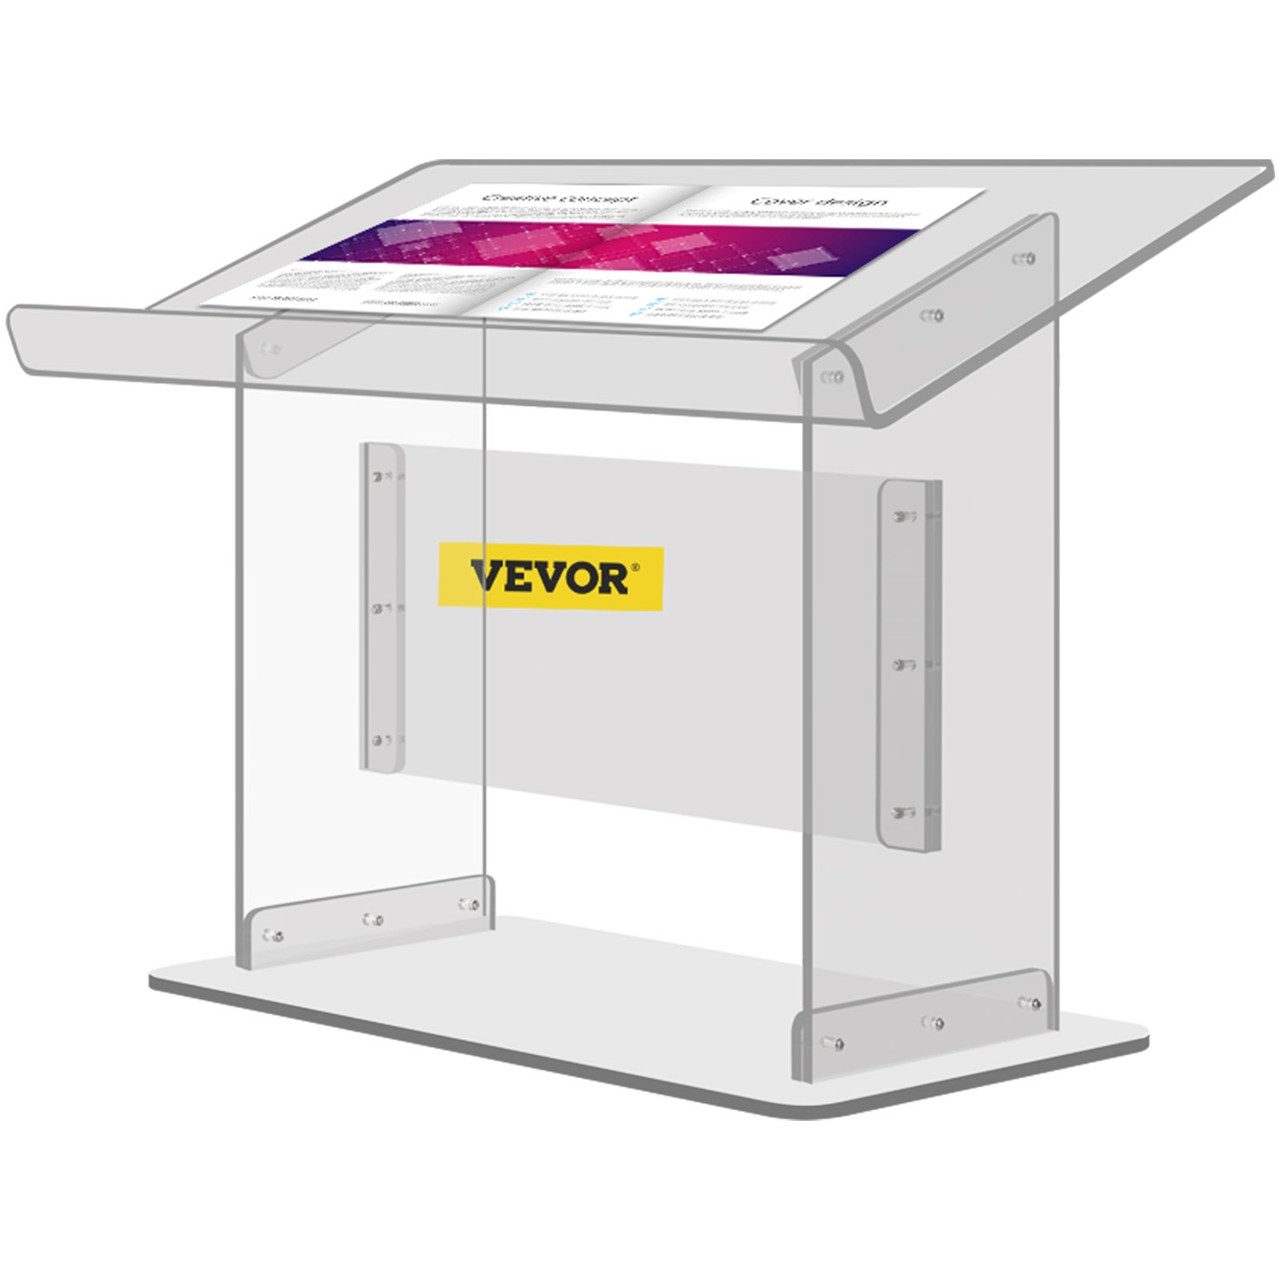 Tabletop Acrylic Podium 19.5" Tall Plexiglass Podium 27"x13.7" Table Acrylic Pulpits for Churches Slanted Surface with Lip for Book Holder Clear Lectern for Lecture Recital Speech & Presentation